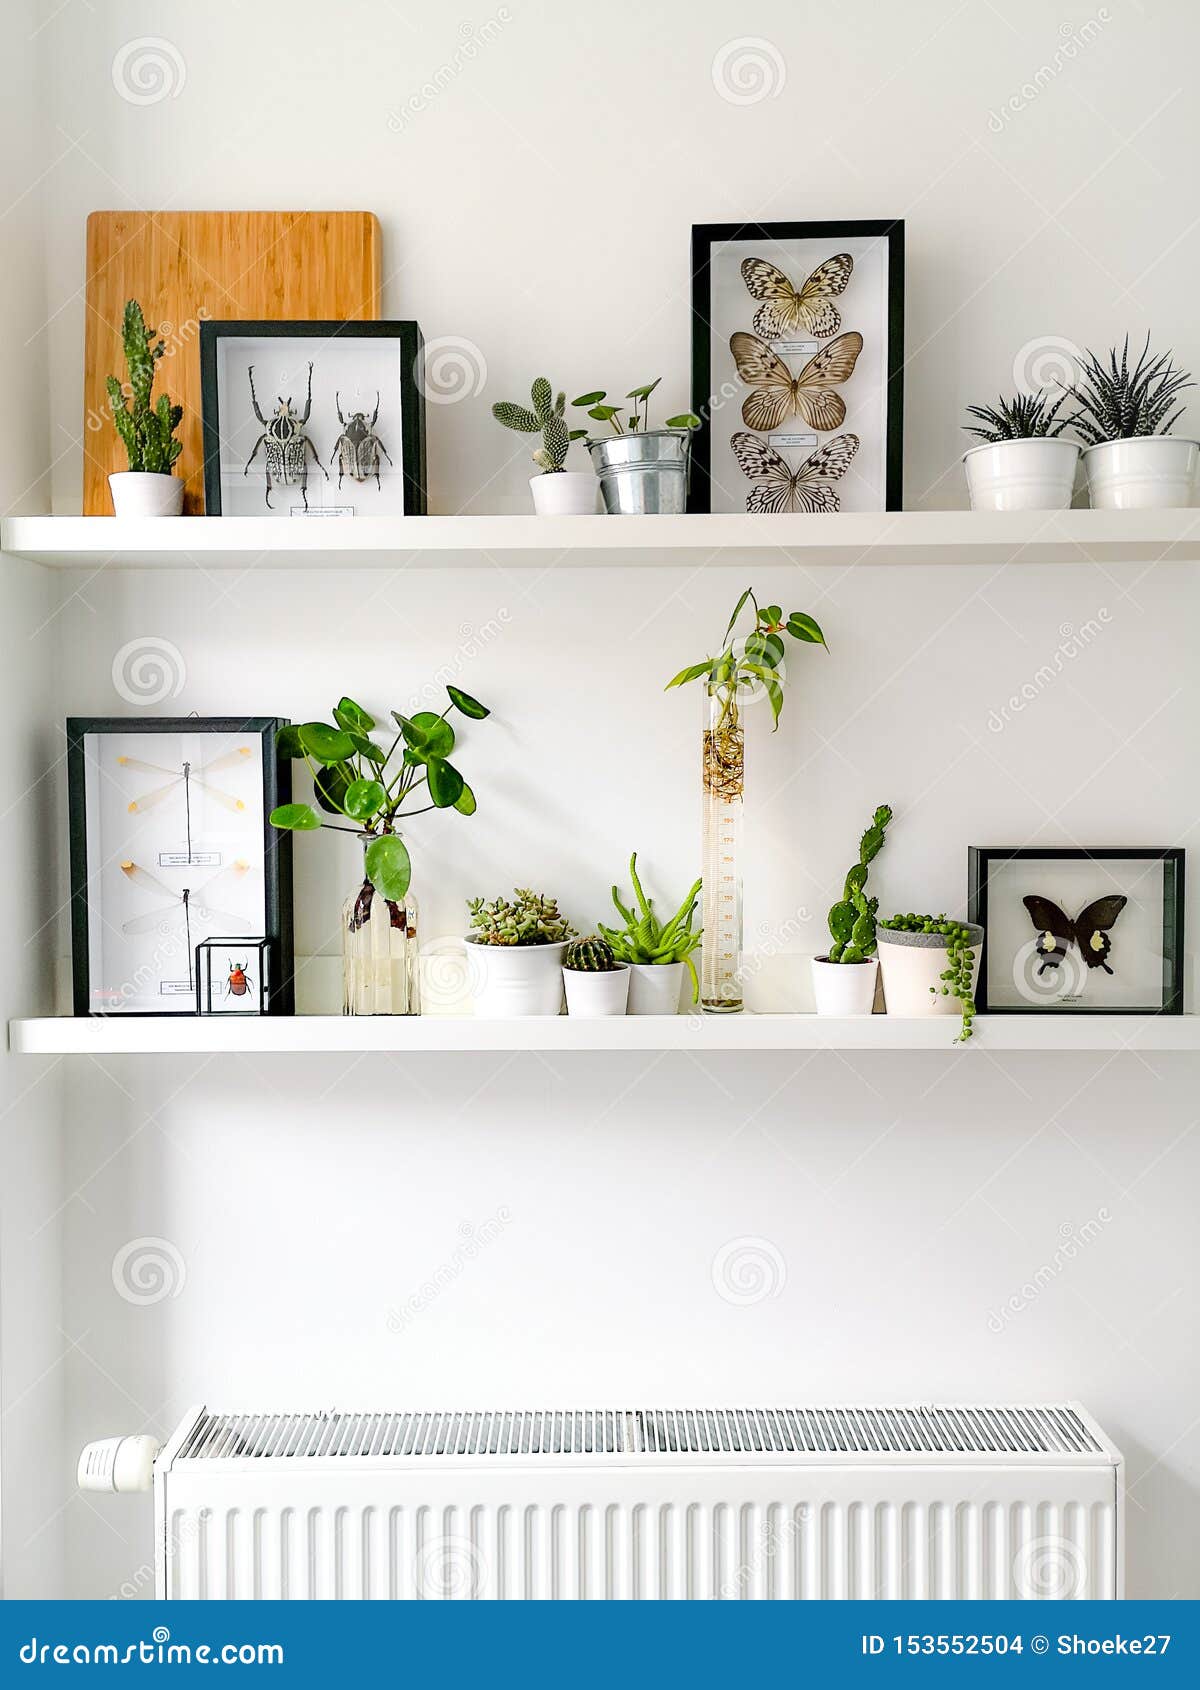 White Hanging Shelves With Numerous Plants And Framed Taxidermy